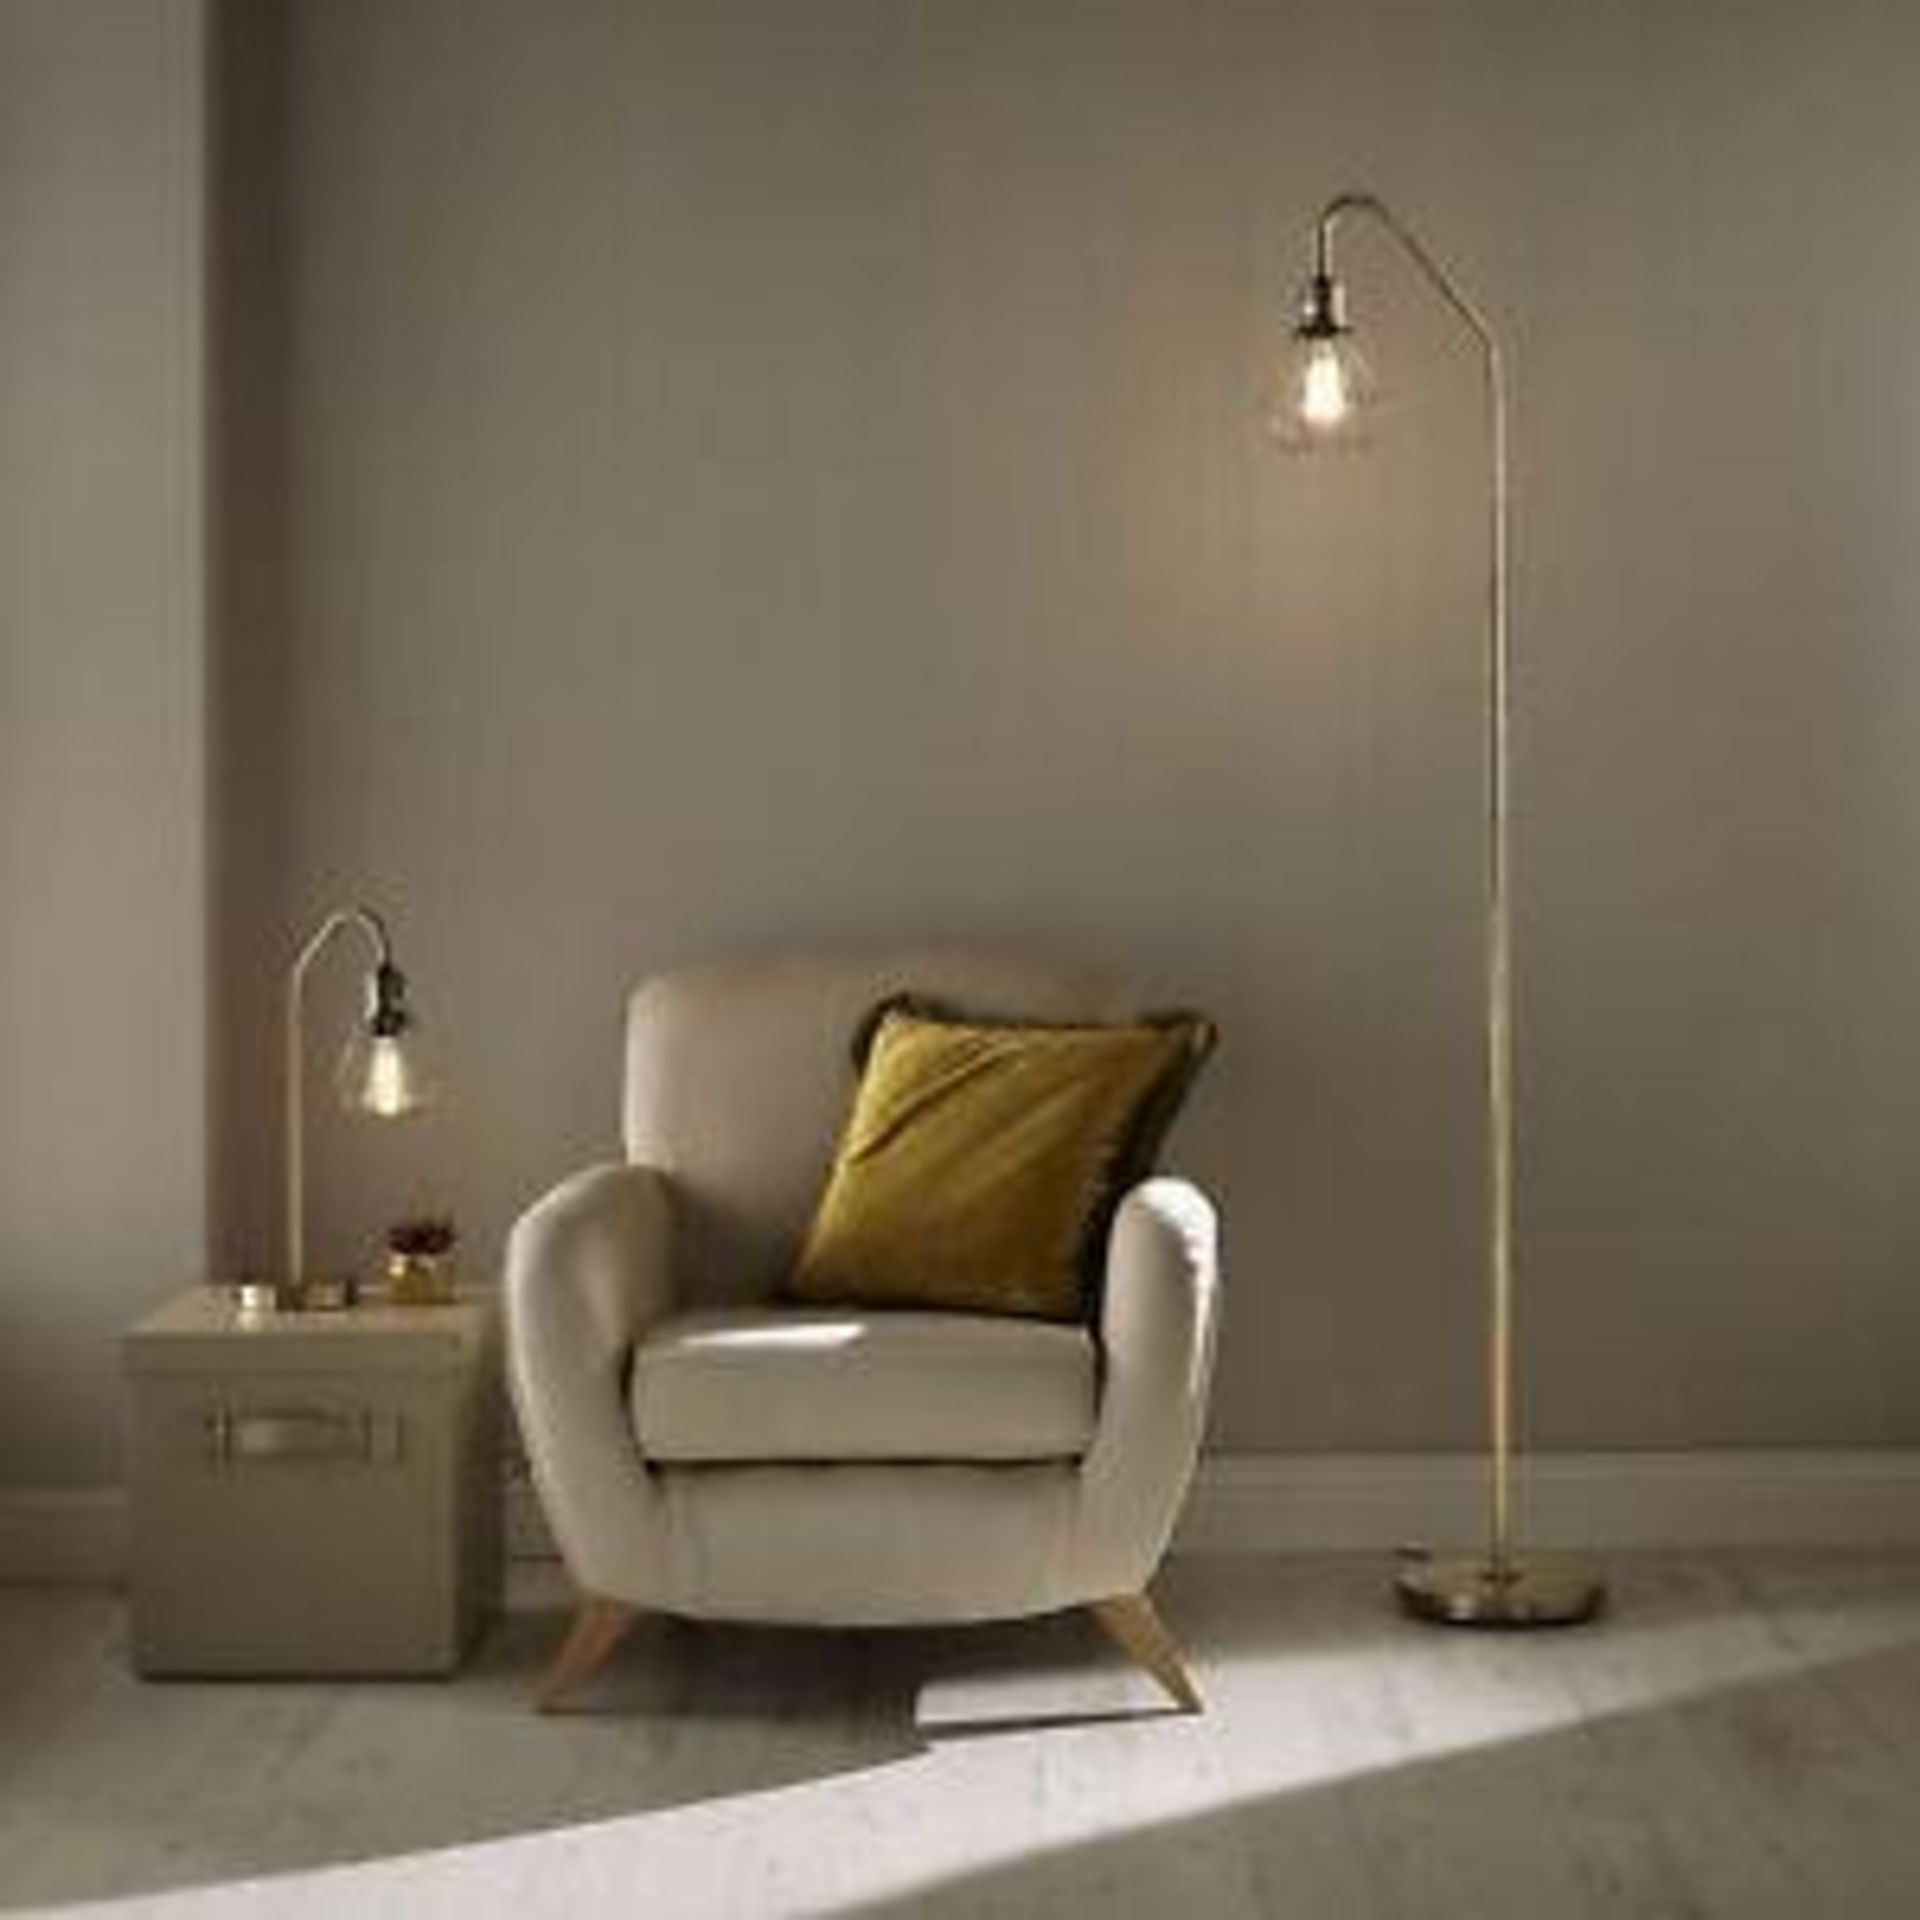 Floor Lamp In Antique Brass With The Caged Bulbholder, Stunning Beautiful Floor Lamp - ER47.